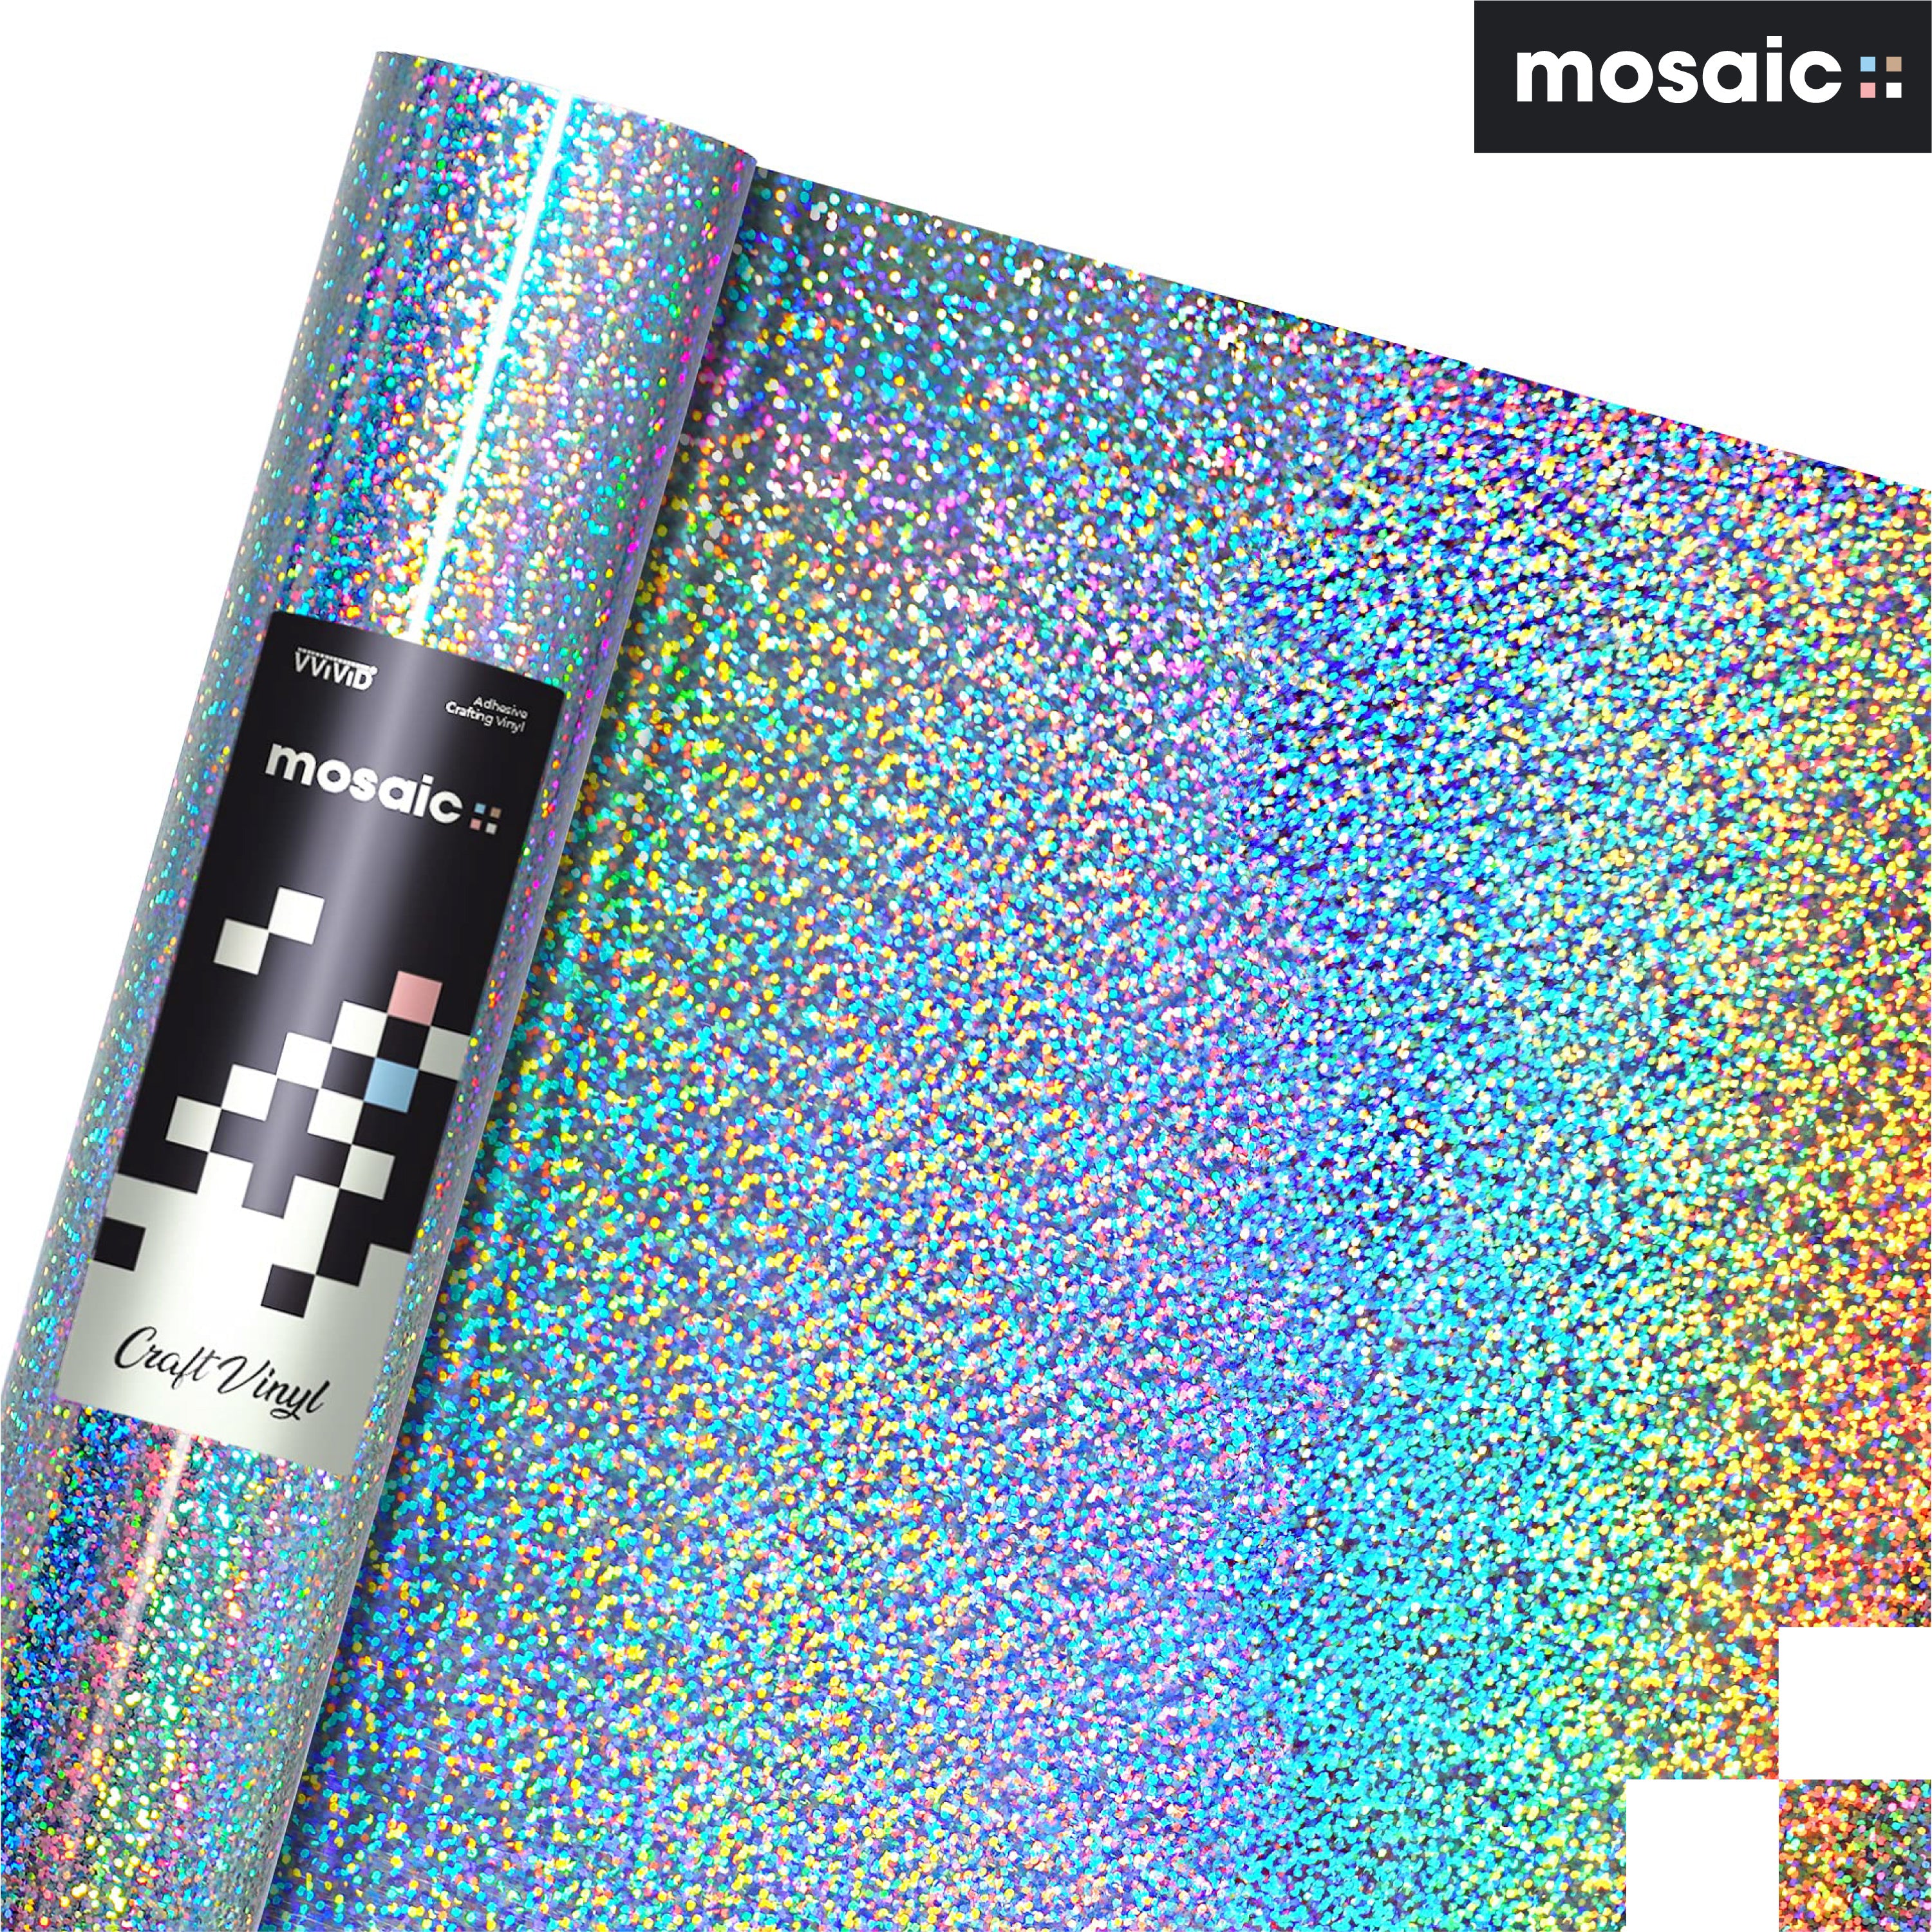 Silver Holographic Sparkle Adhesive Vinyl Rolls By Craftables –  shopcraftables